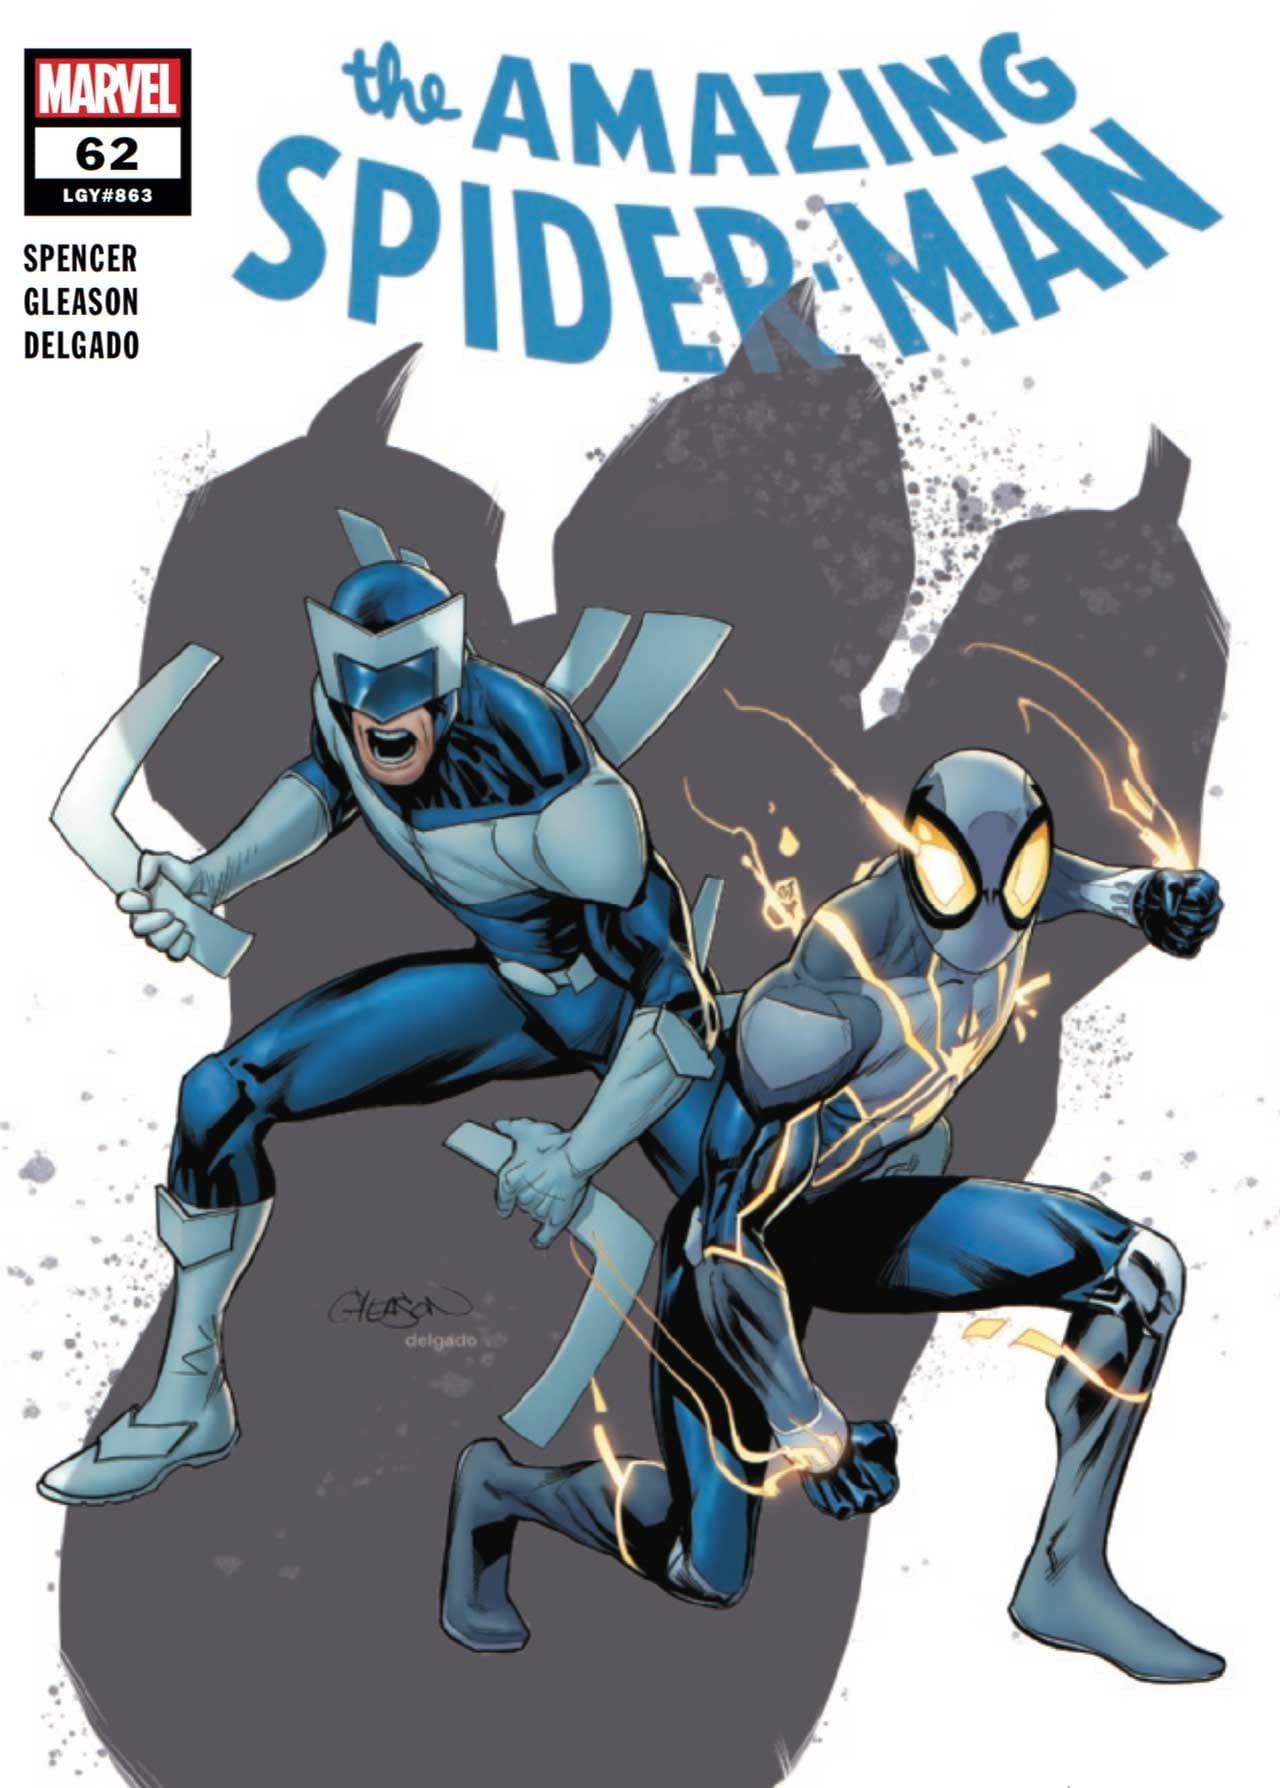 The Amazing Spider-Man #7 Review